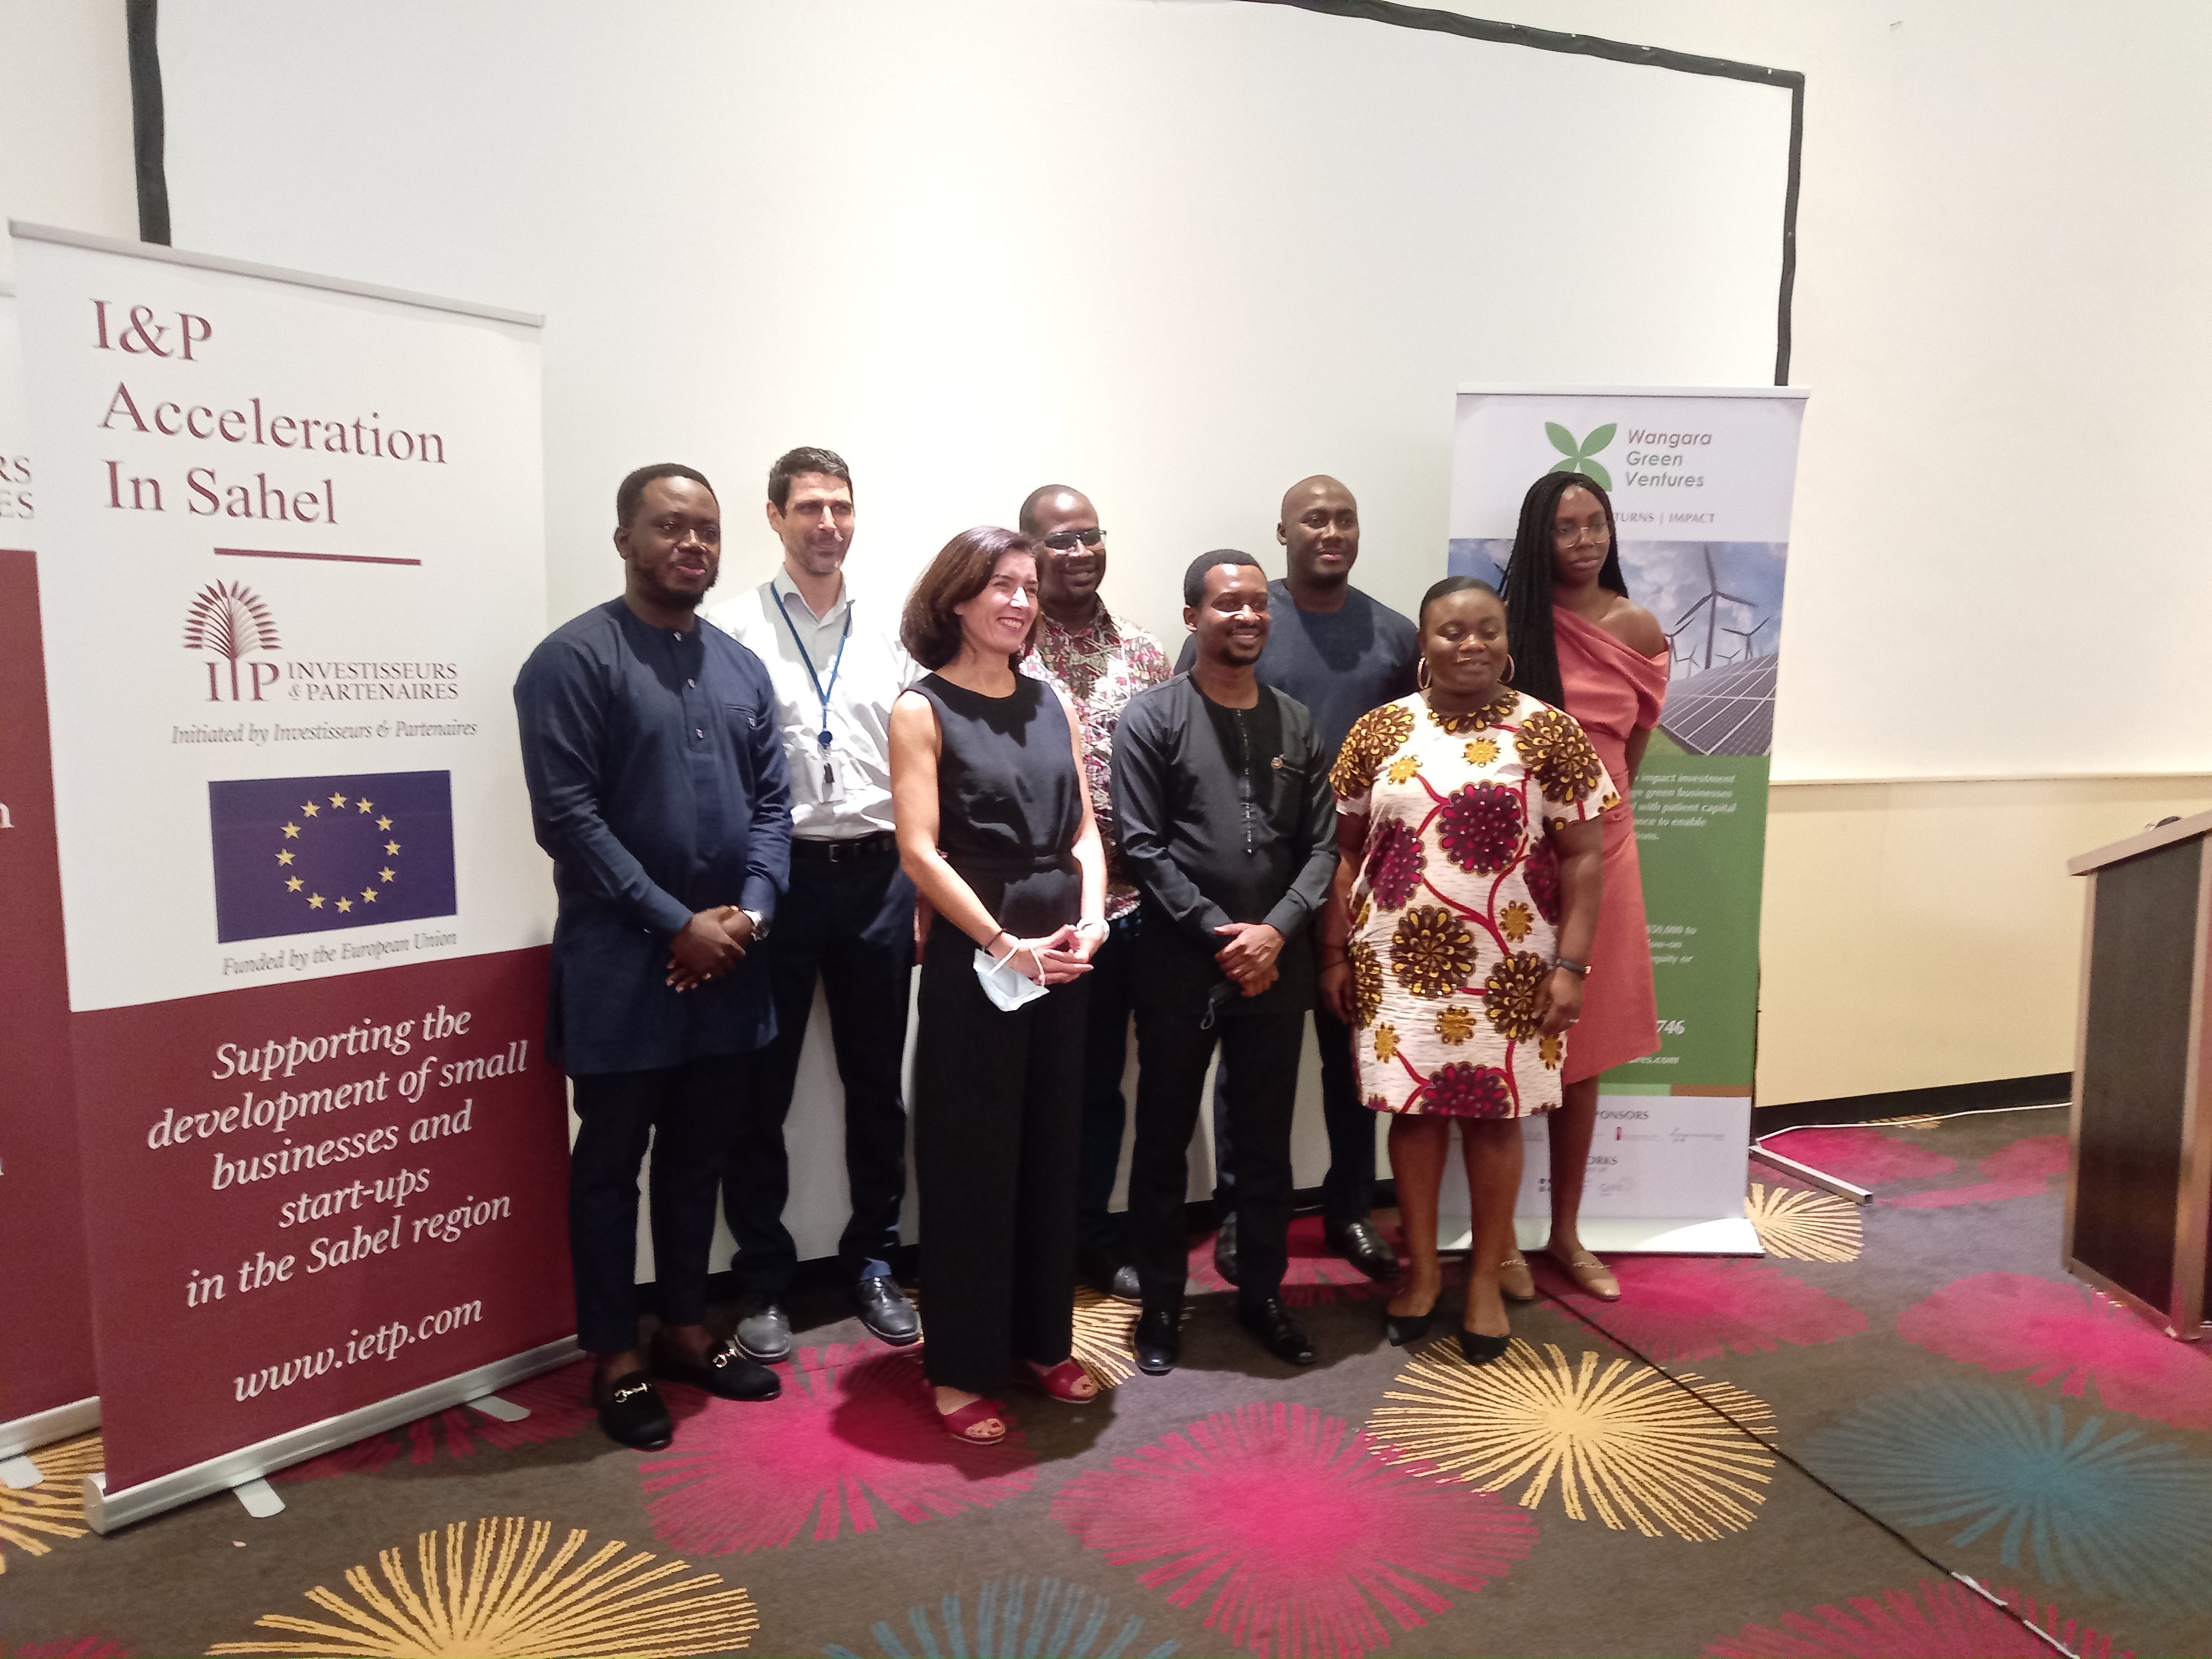 Ms Sophie Ménager (1st left), Programme Manager of IPAS, Mr Ebenezer Arthur (2nd left) Chief Executive Officer of Wangara Capital, Mr Emmanuel Subiran (2nd left, back) Programme Officer, Governance Section of the EU Delegation in Ghana and Mr Baafour Otu-Boateng, (3rd left, back) Senior Investment Manager at I&P, with others during the information session in Accra